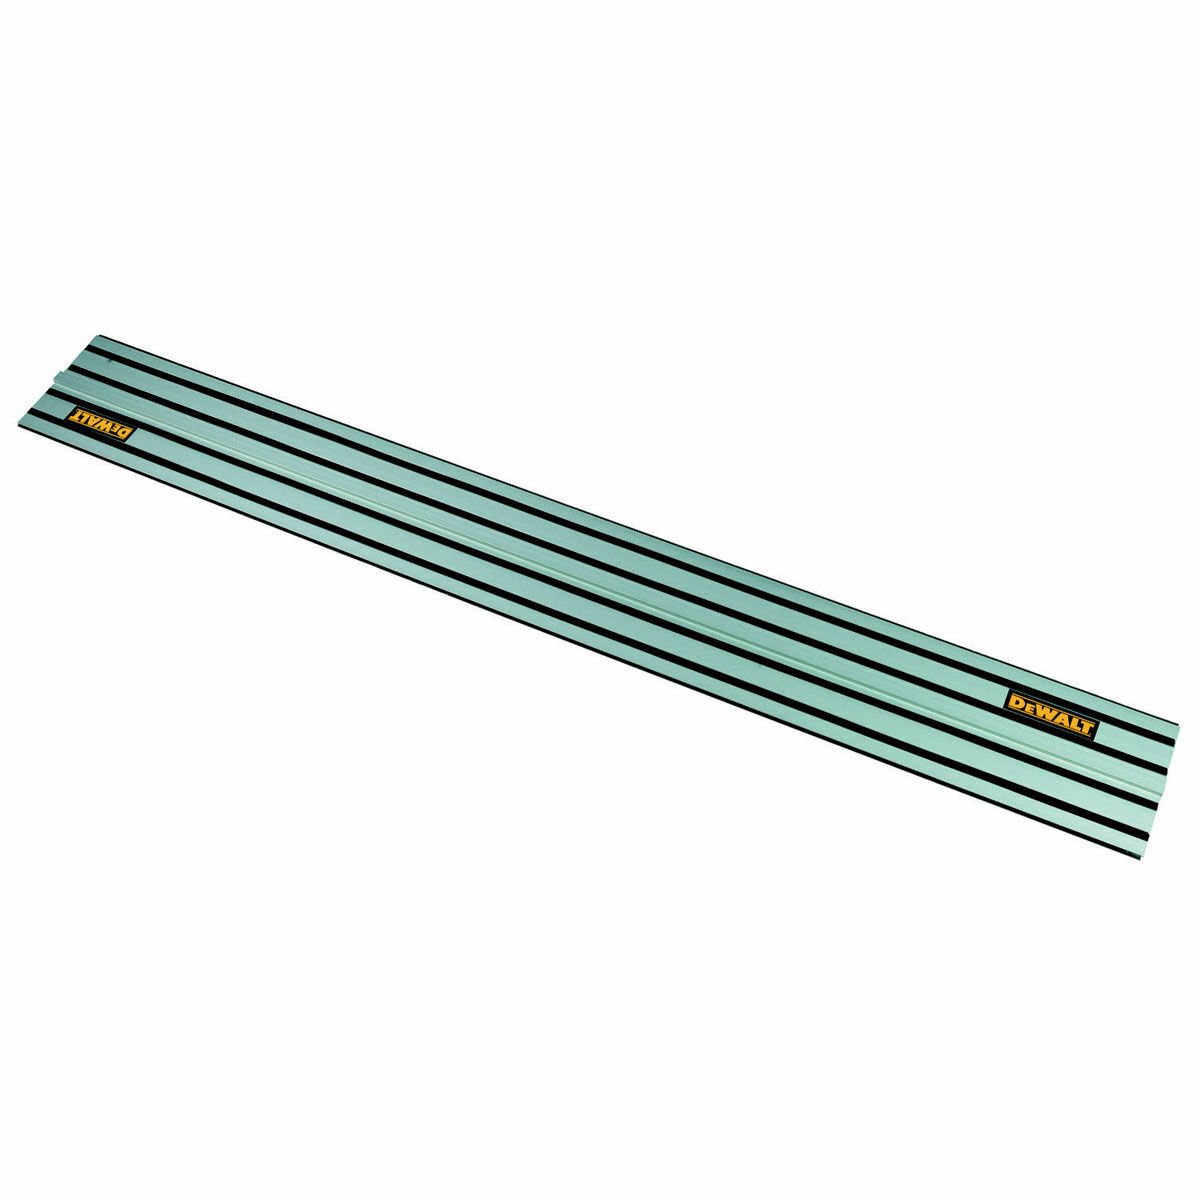 Image of Dewalt <br><strong>DWS5022 1.5 Metre Guide Rail</strong>